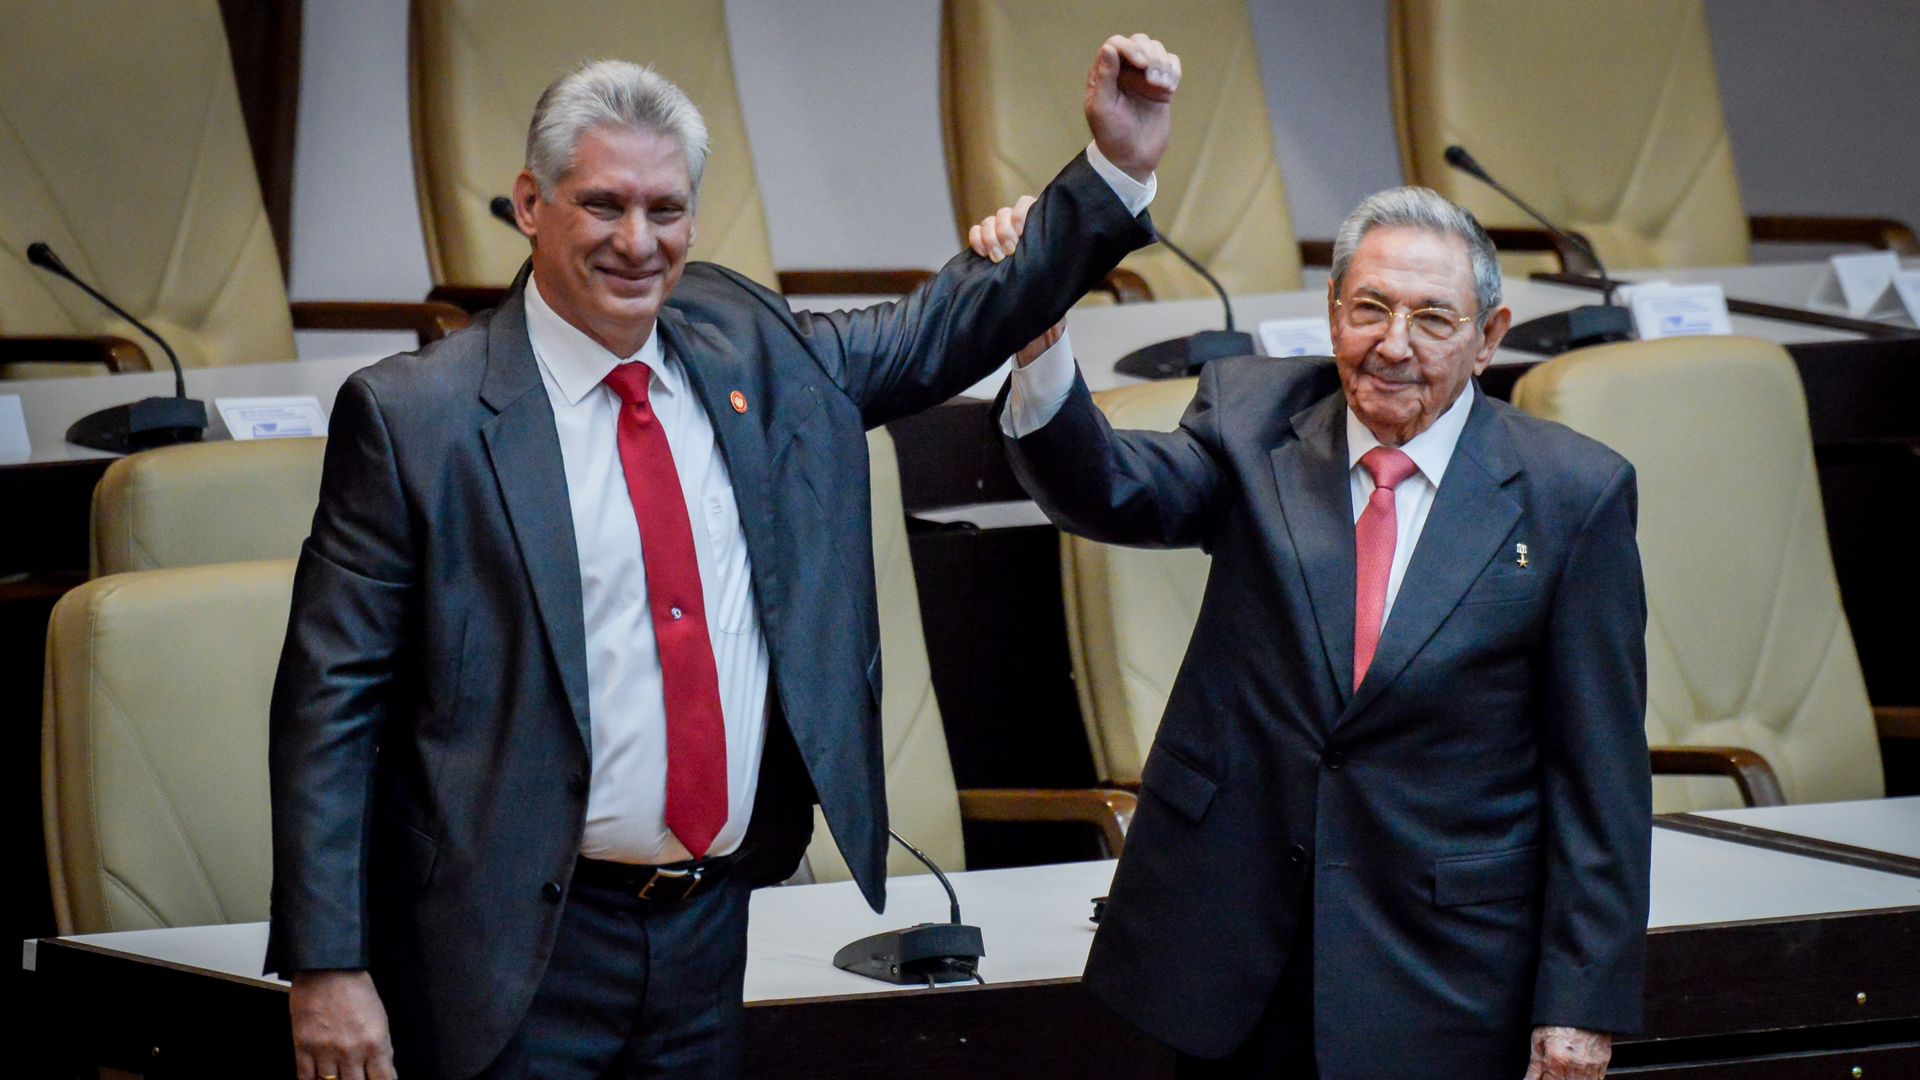 Former Cuban President Raul Castro raises the arm of newly elected Cuban President Miguel Diaz-Canel.